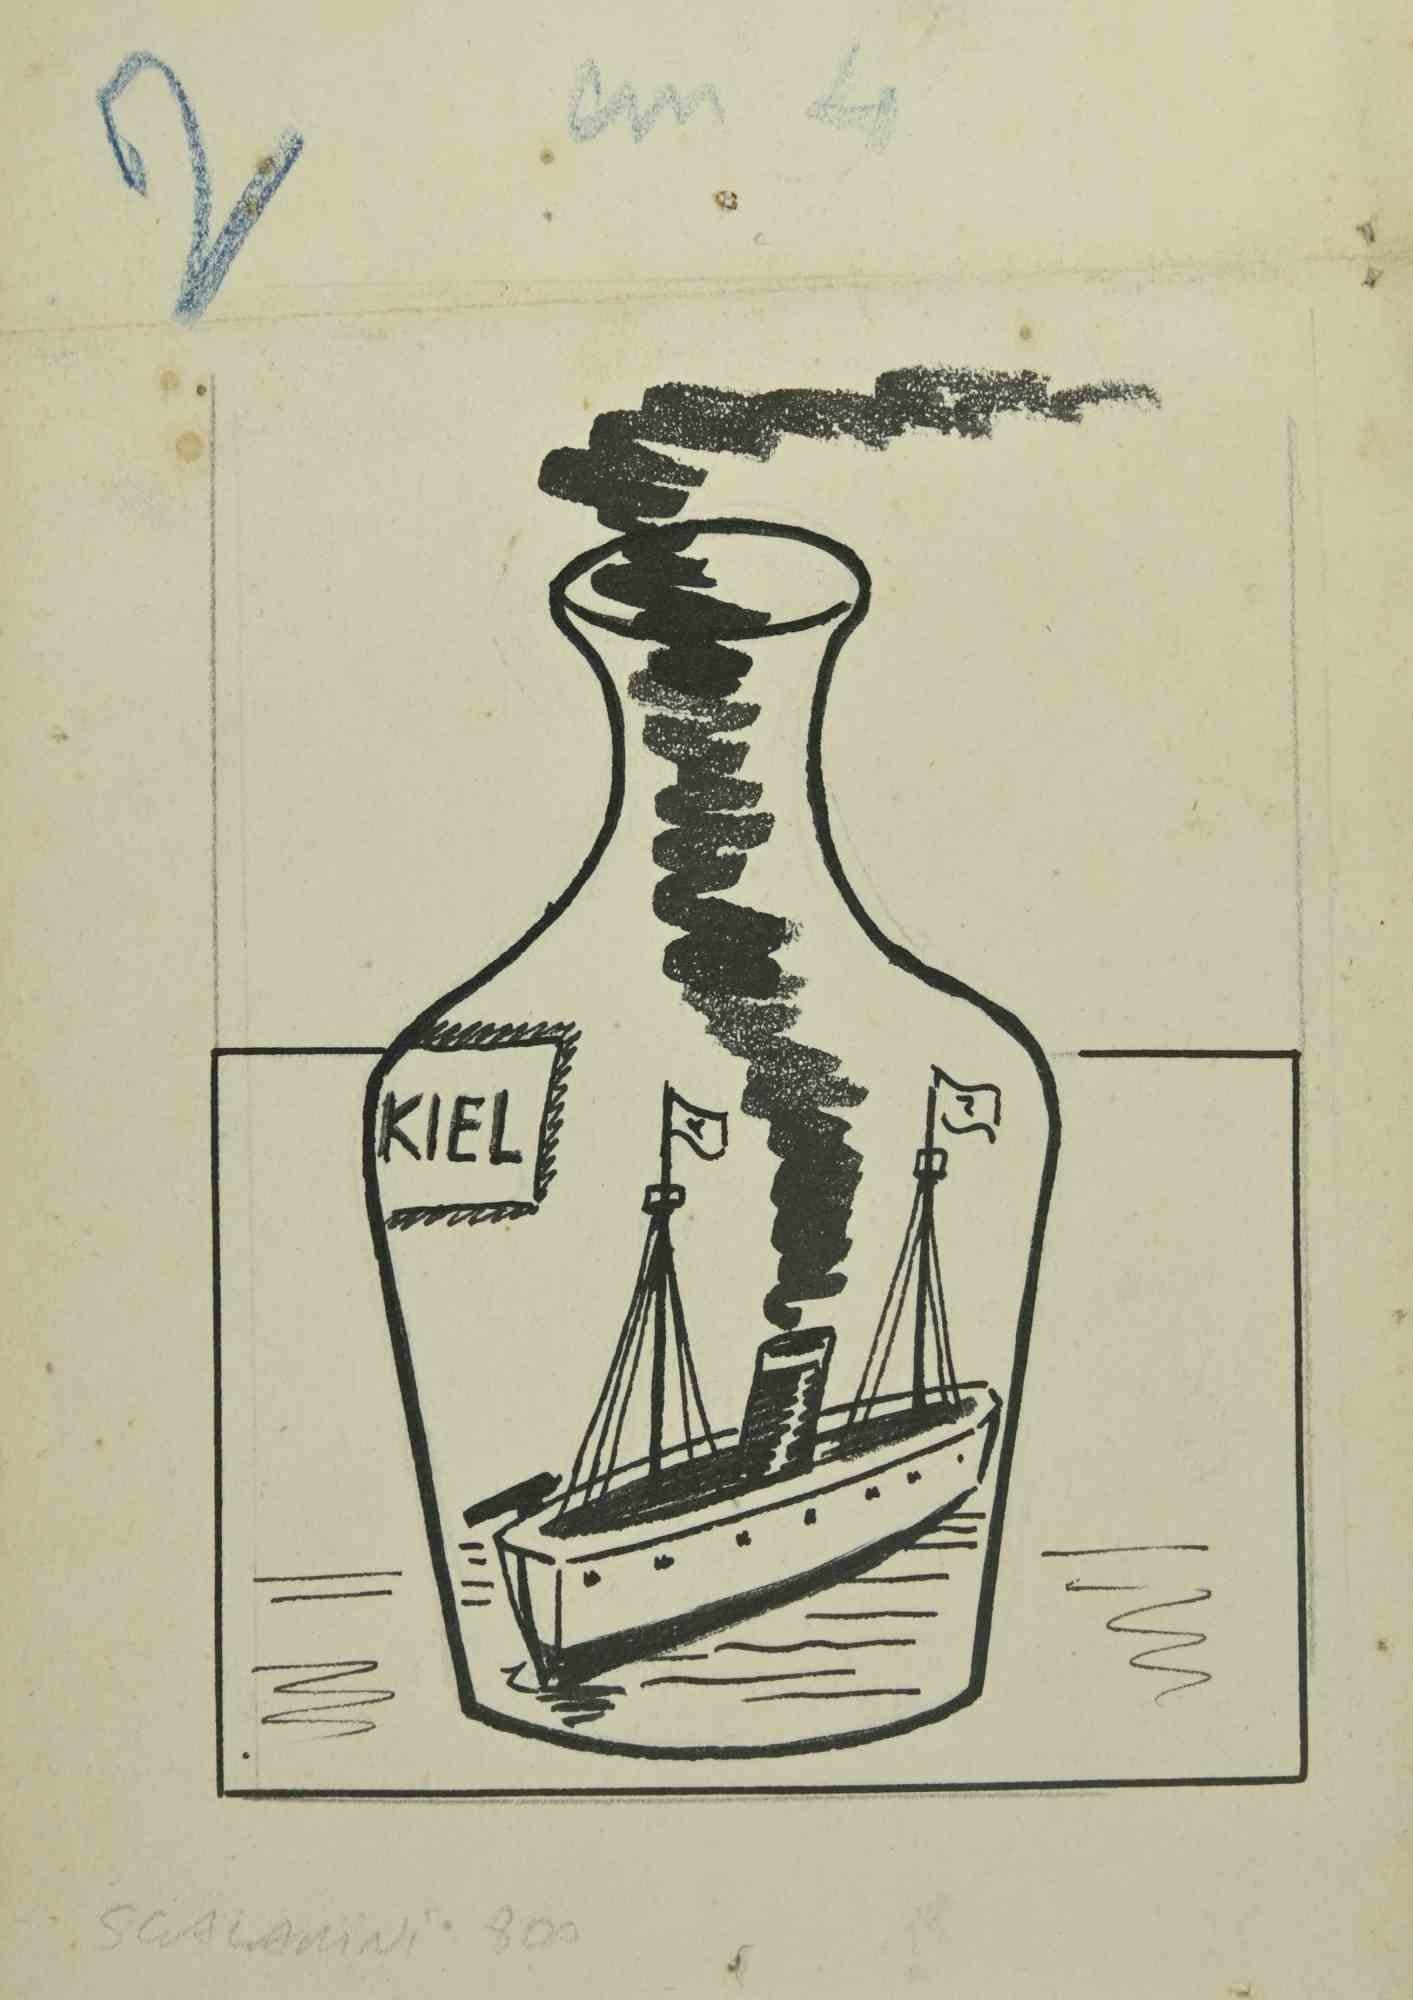 The Bottle is a drawing artwork in Black Marker on paper realized by Italian Artist Giuseppe Scalarini (Mantova, 29 Gennaio 1873 – Milano, 30 December 1948).

The state of preservation is good, except for some folding and foxing.

Giuseppe Scalarini